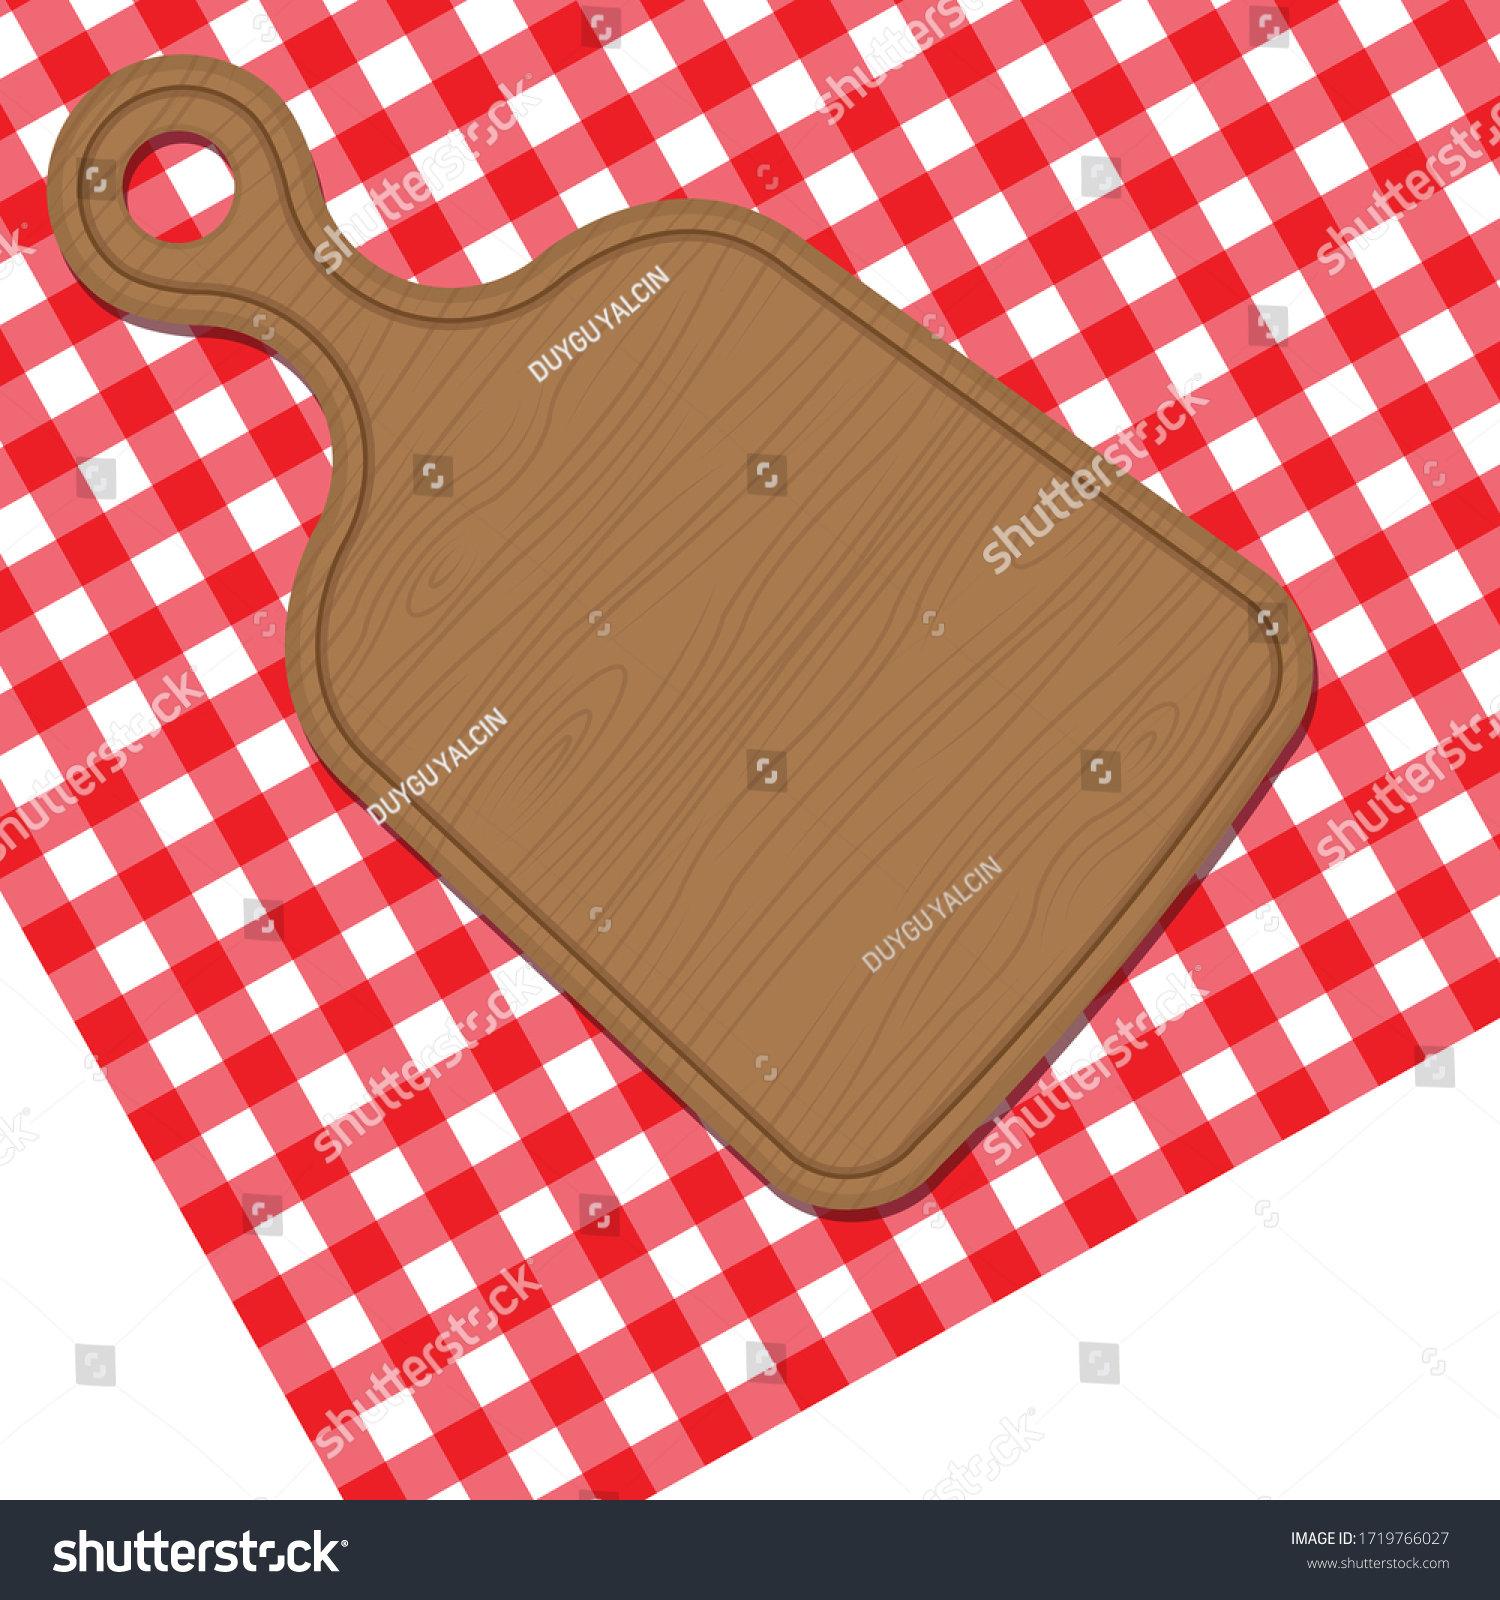 SVG of Bread cutting board on the red checkered tablecloth.  svg